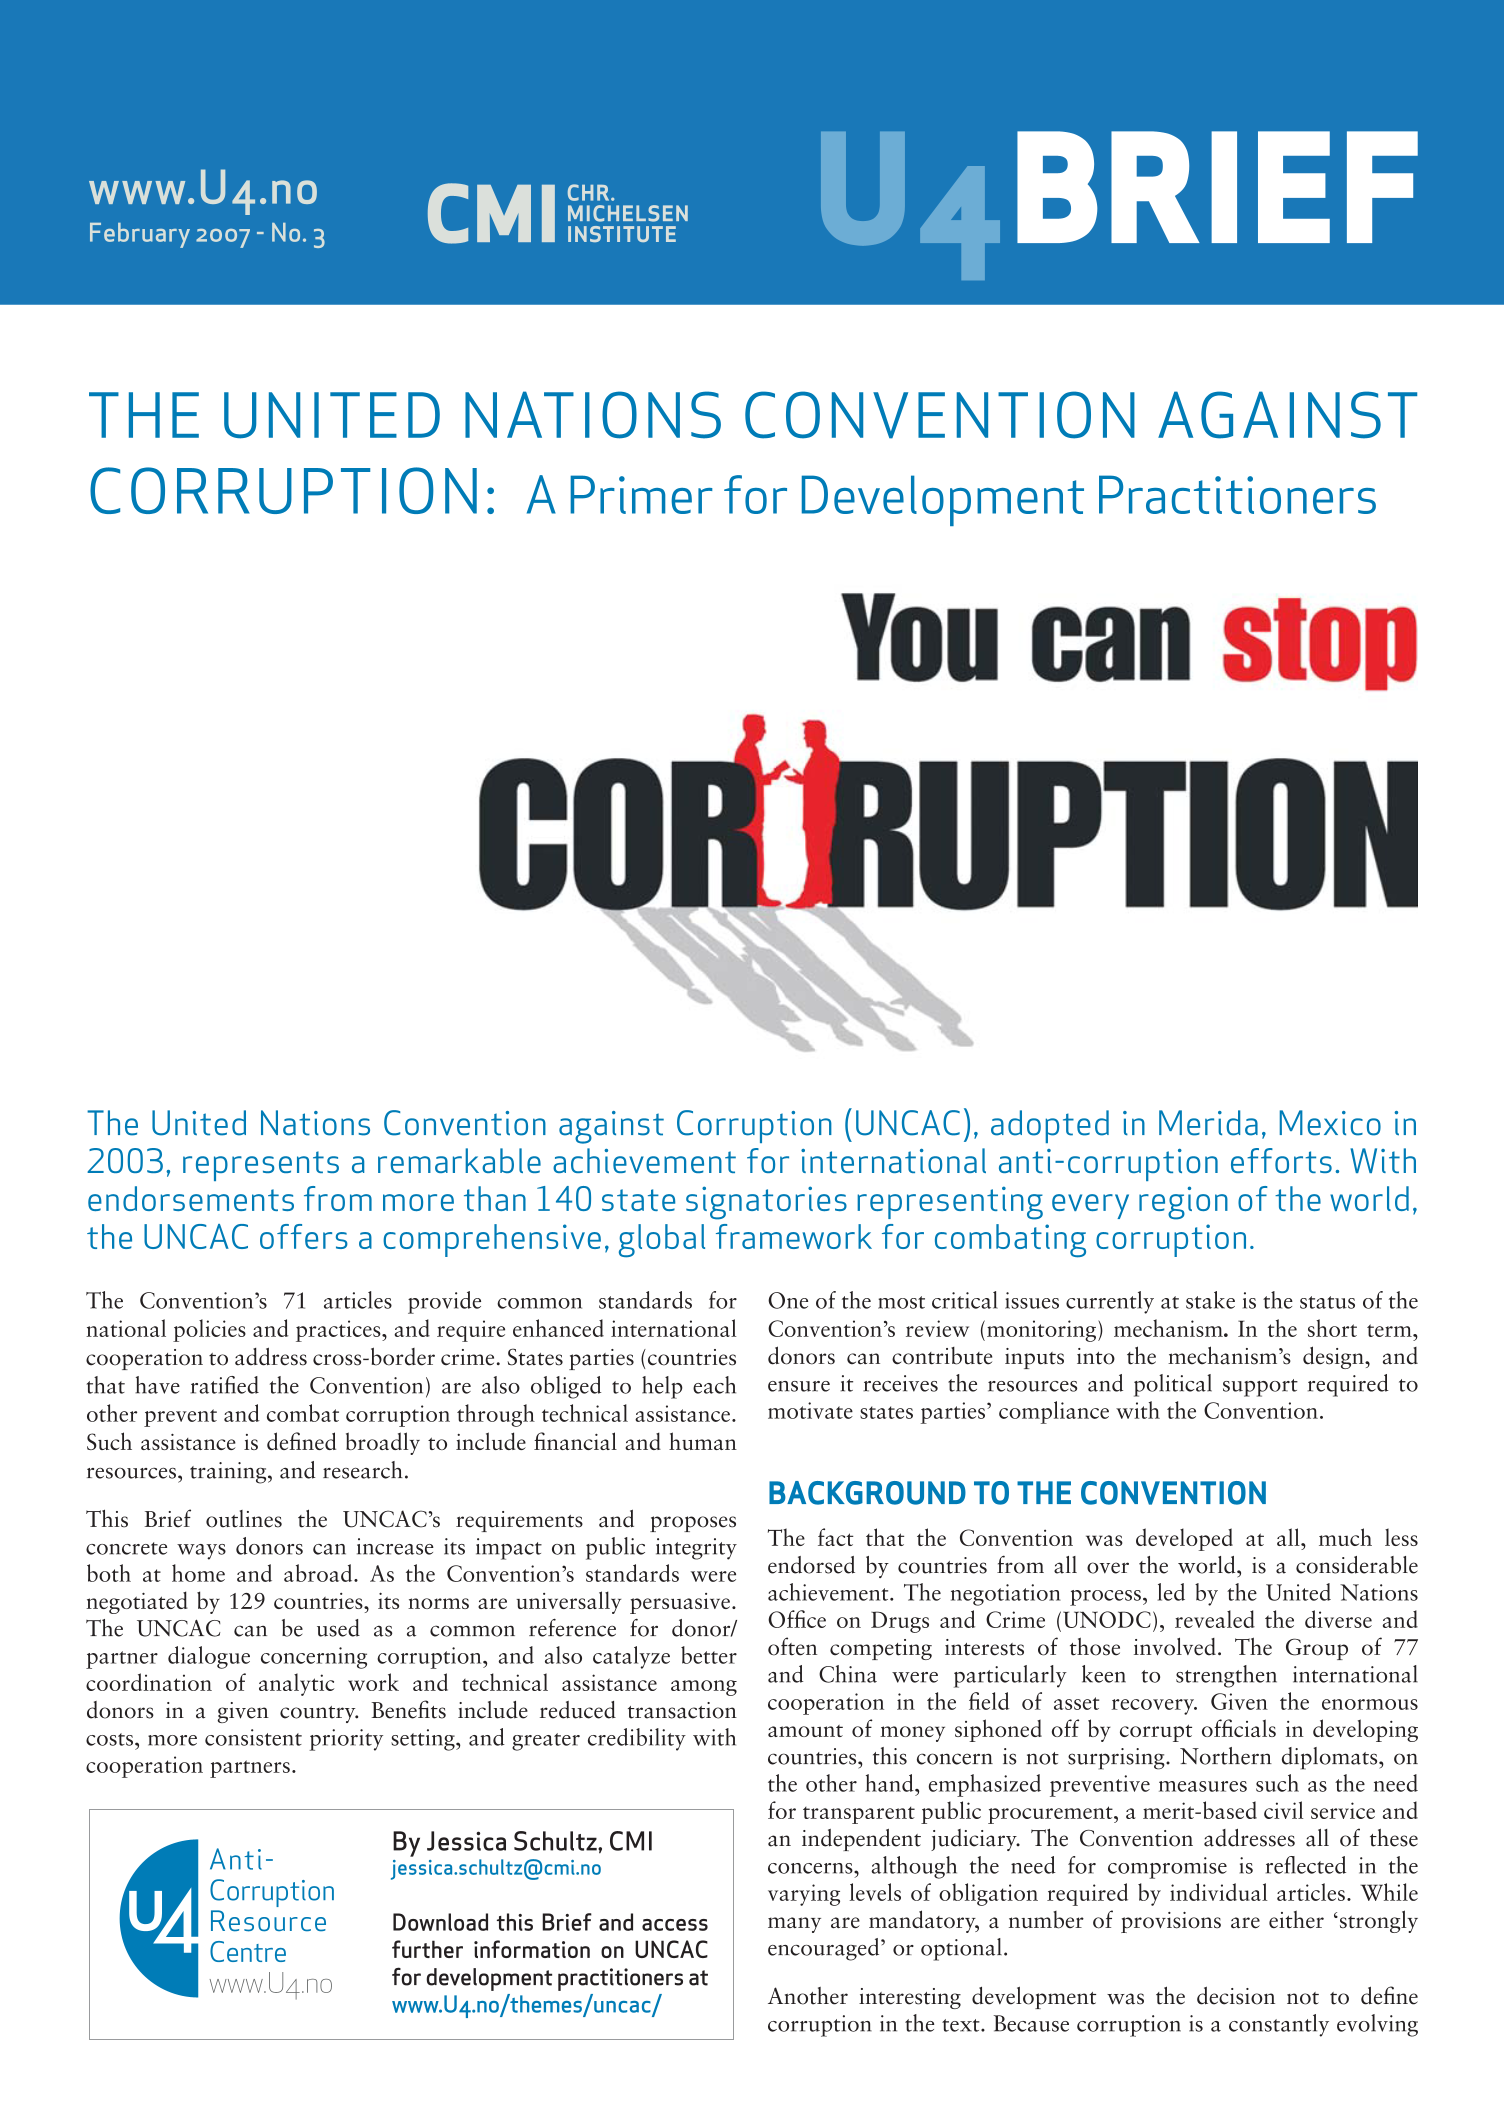 The United Nations Convention against Corruption. A Primer for Development Practitioners